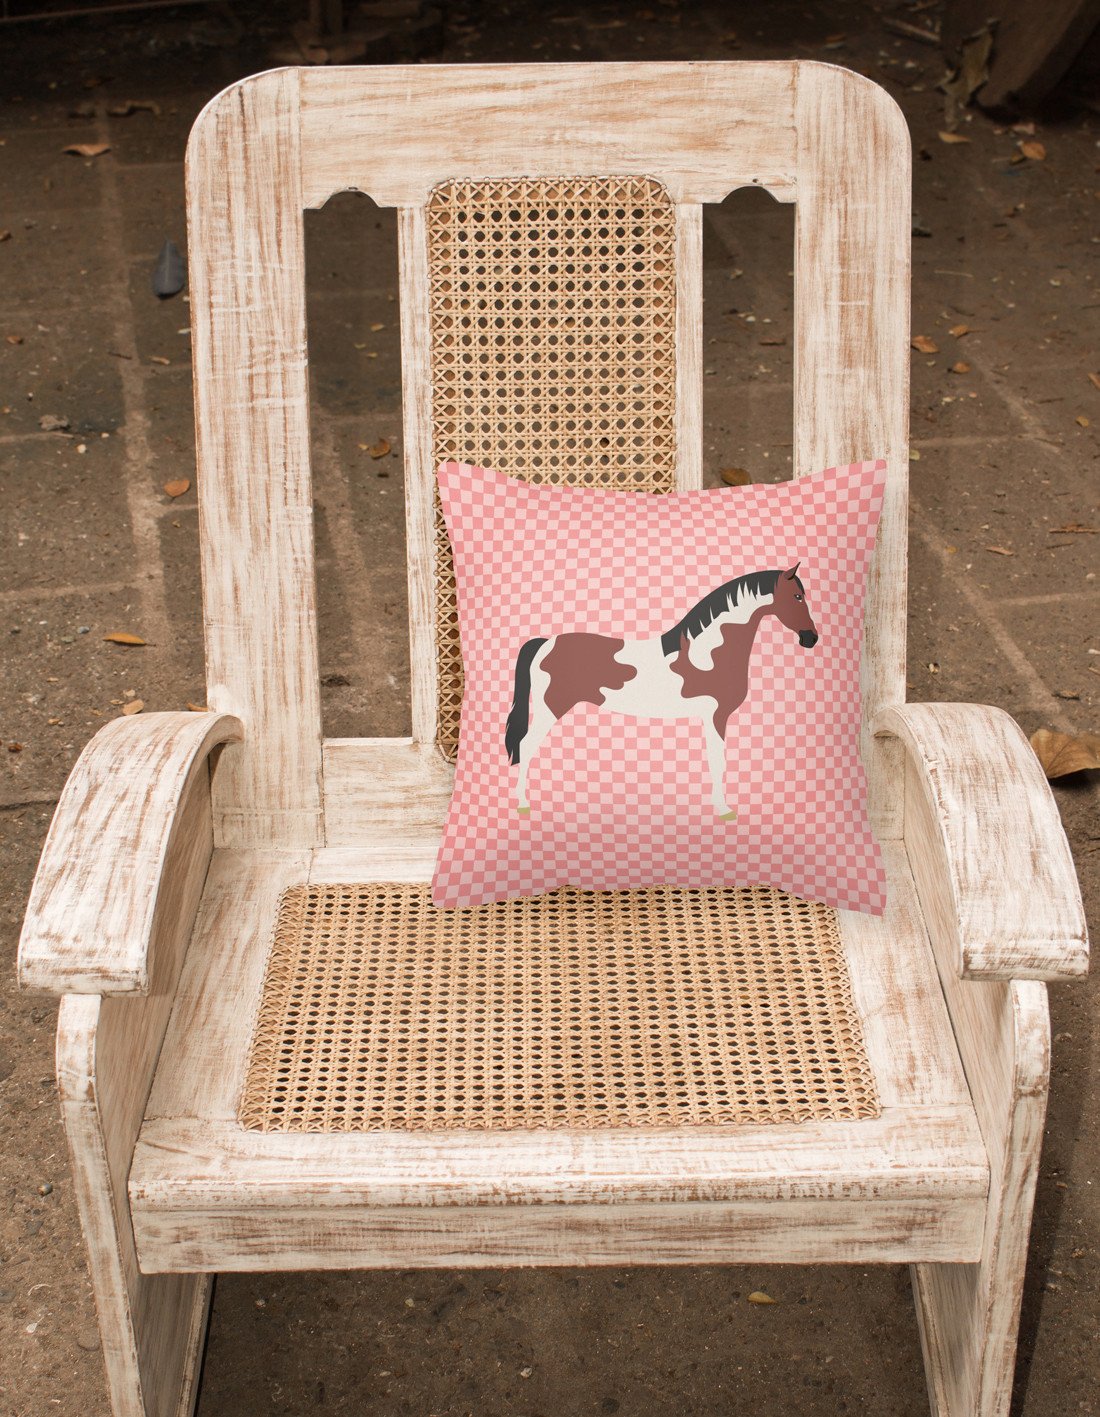 Pinto Horse Pink Check Fabric Decorative Pillow BB7907PW1818 by Caroline's Treasures